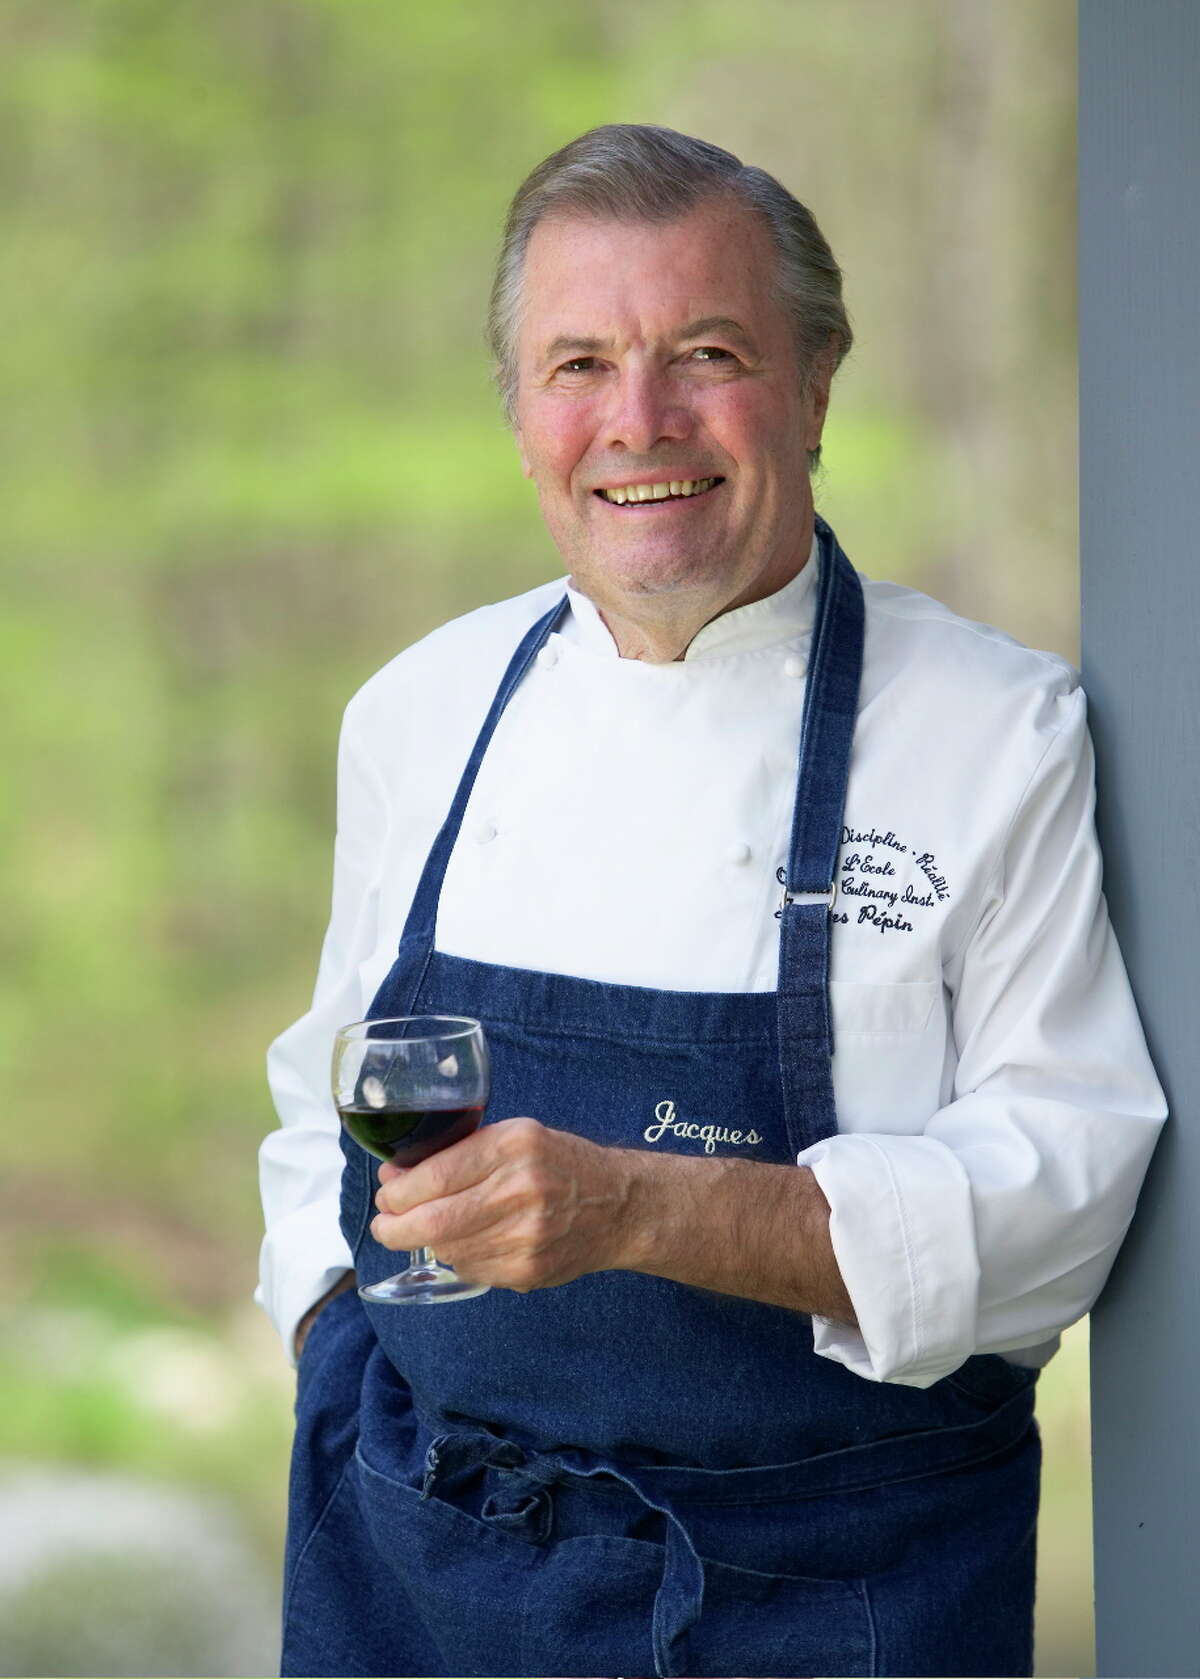 Chef and cookbook author Jacques Pepin will appear at the MetroCooking Houston show, Sept. 15-16, 2012, at Reliant Center.